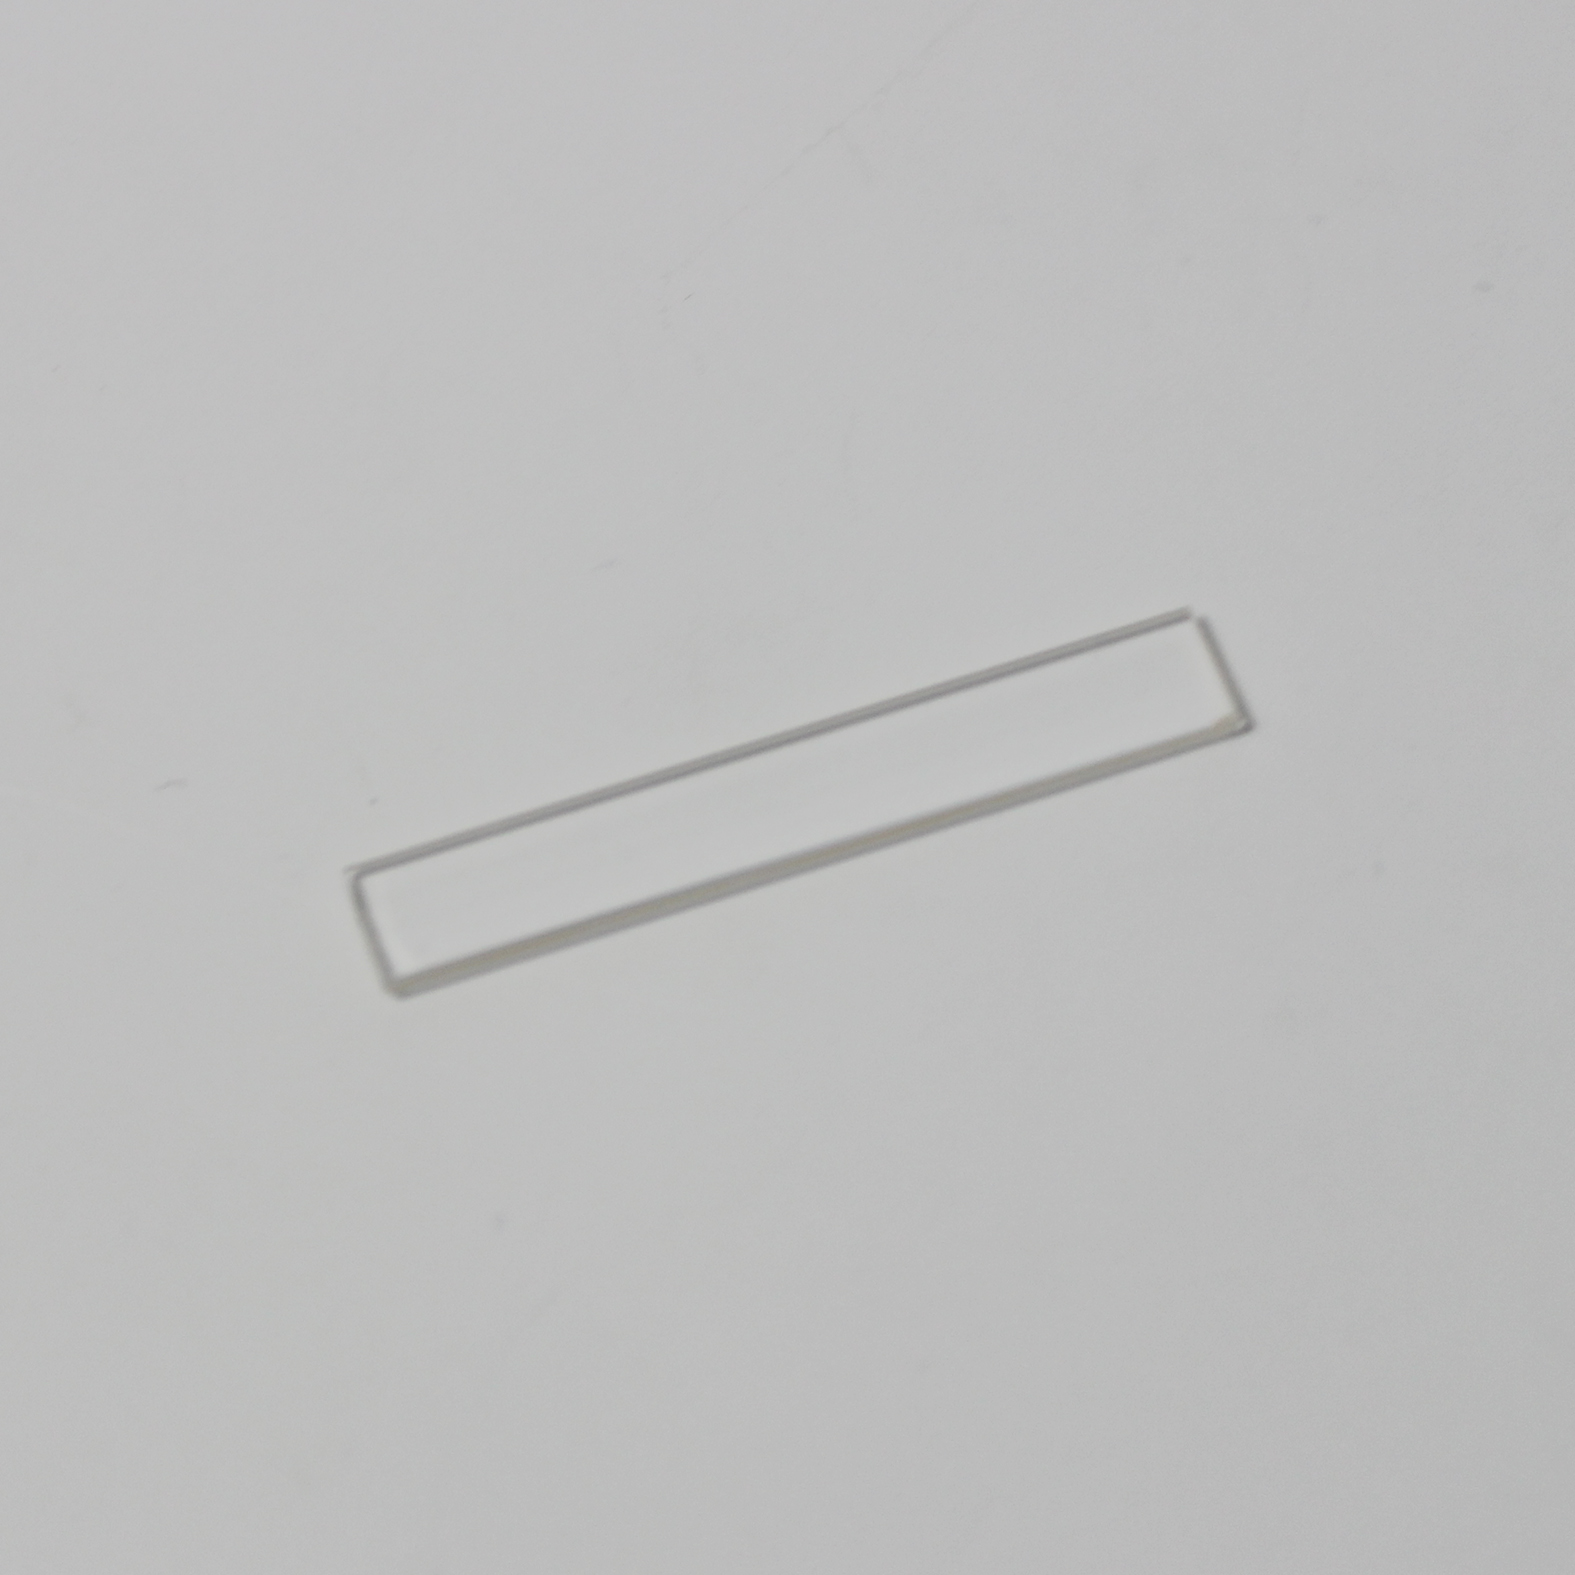 OEM Factory Laser UV Fused Silica Plano Convex Cylindrical Lens